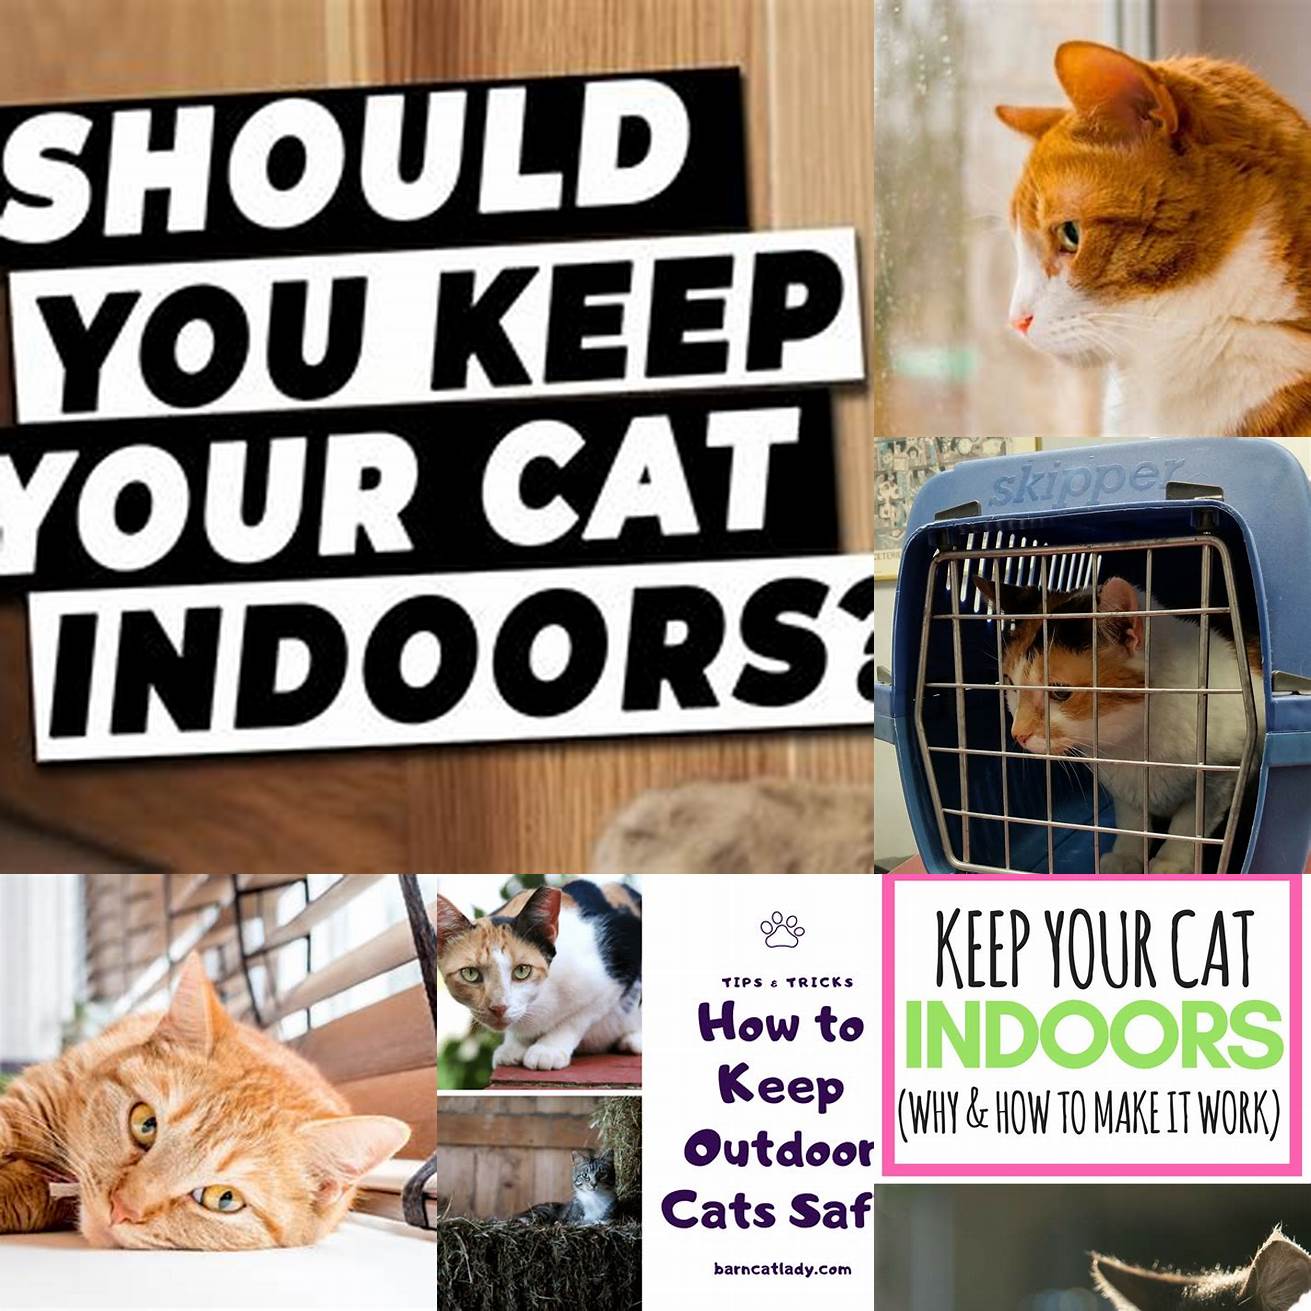 Keep your cat indoors Outdoor cats are more likely to come into contact with other cats and animals that may be carriers of mange mites